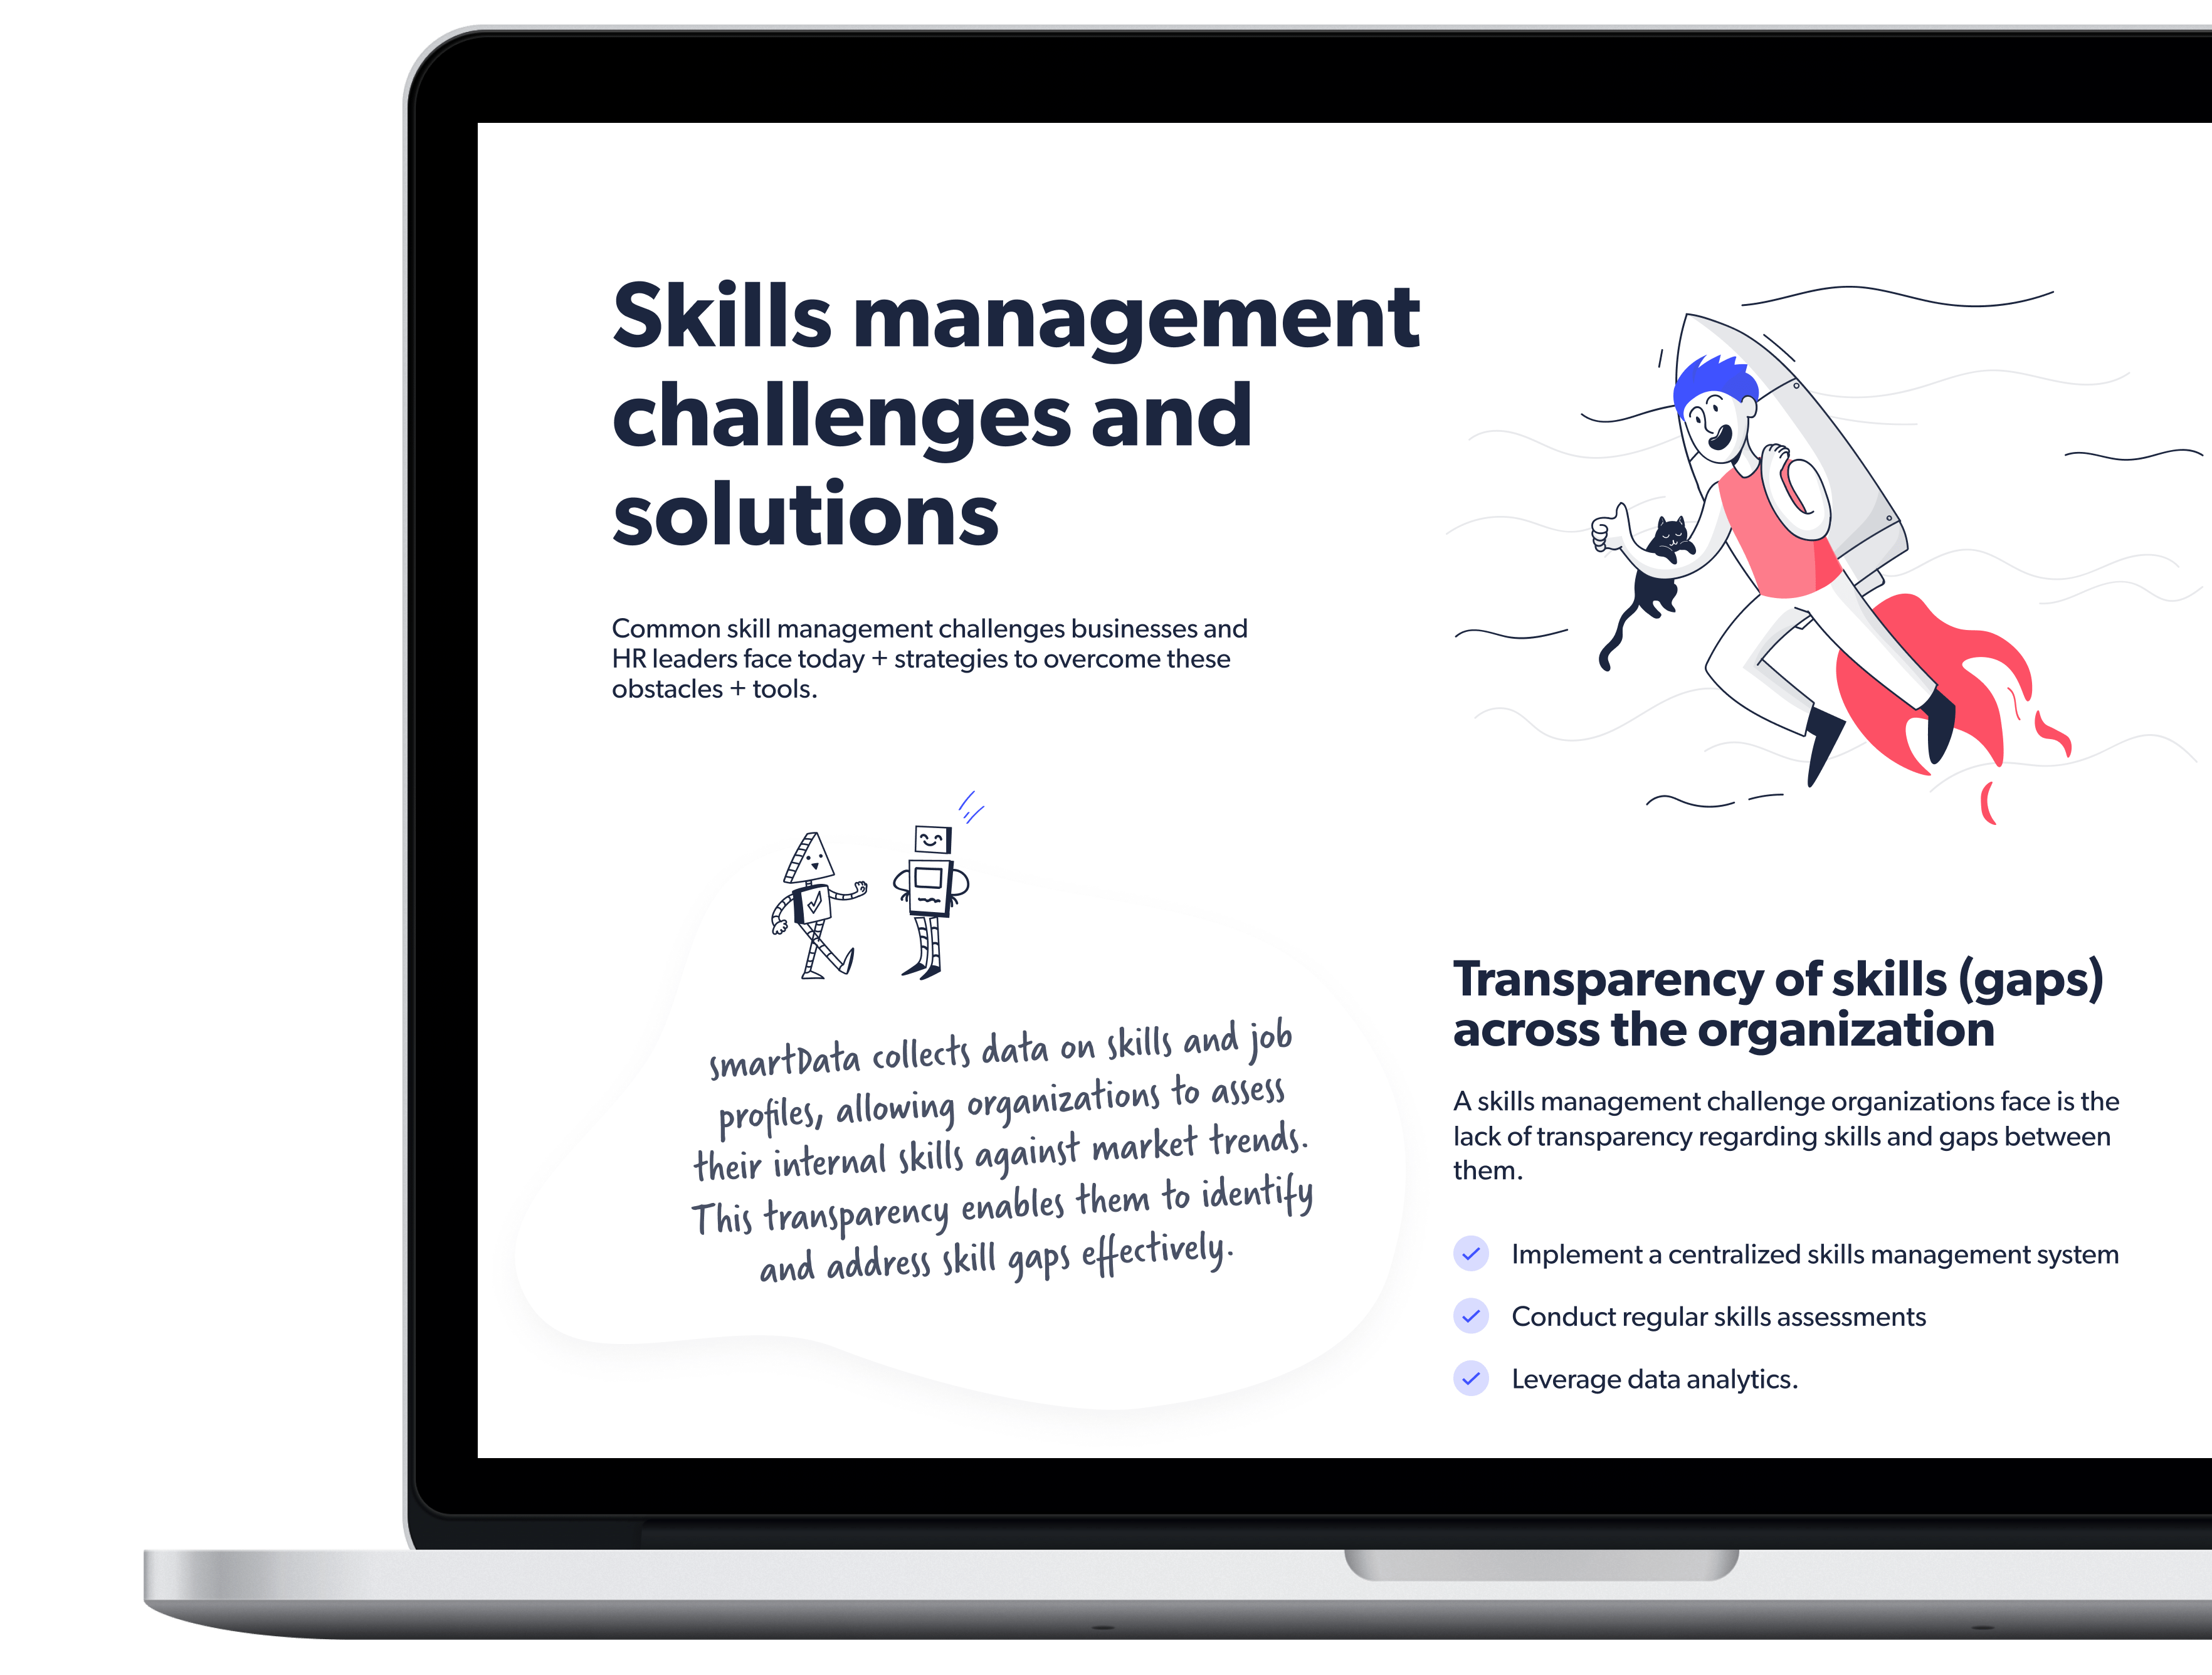 Skills management challenges and solutions 